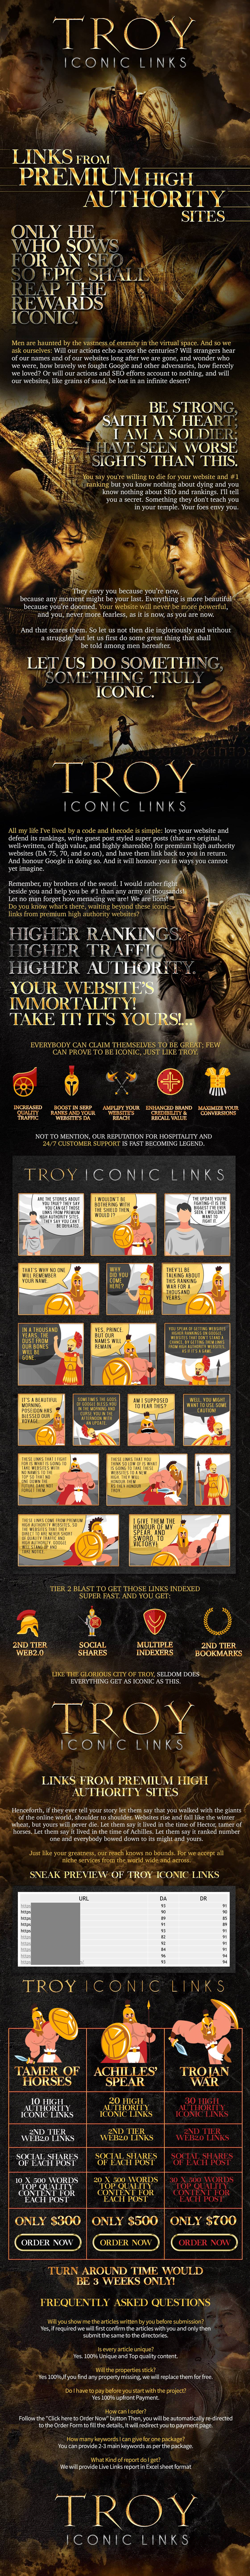 Troy Iconic Links